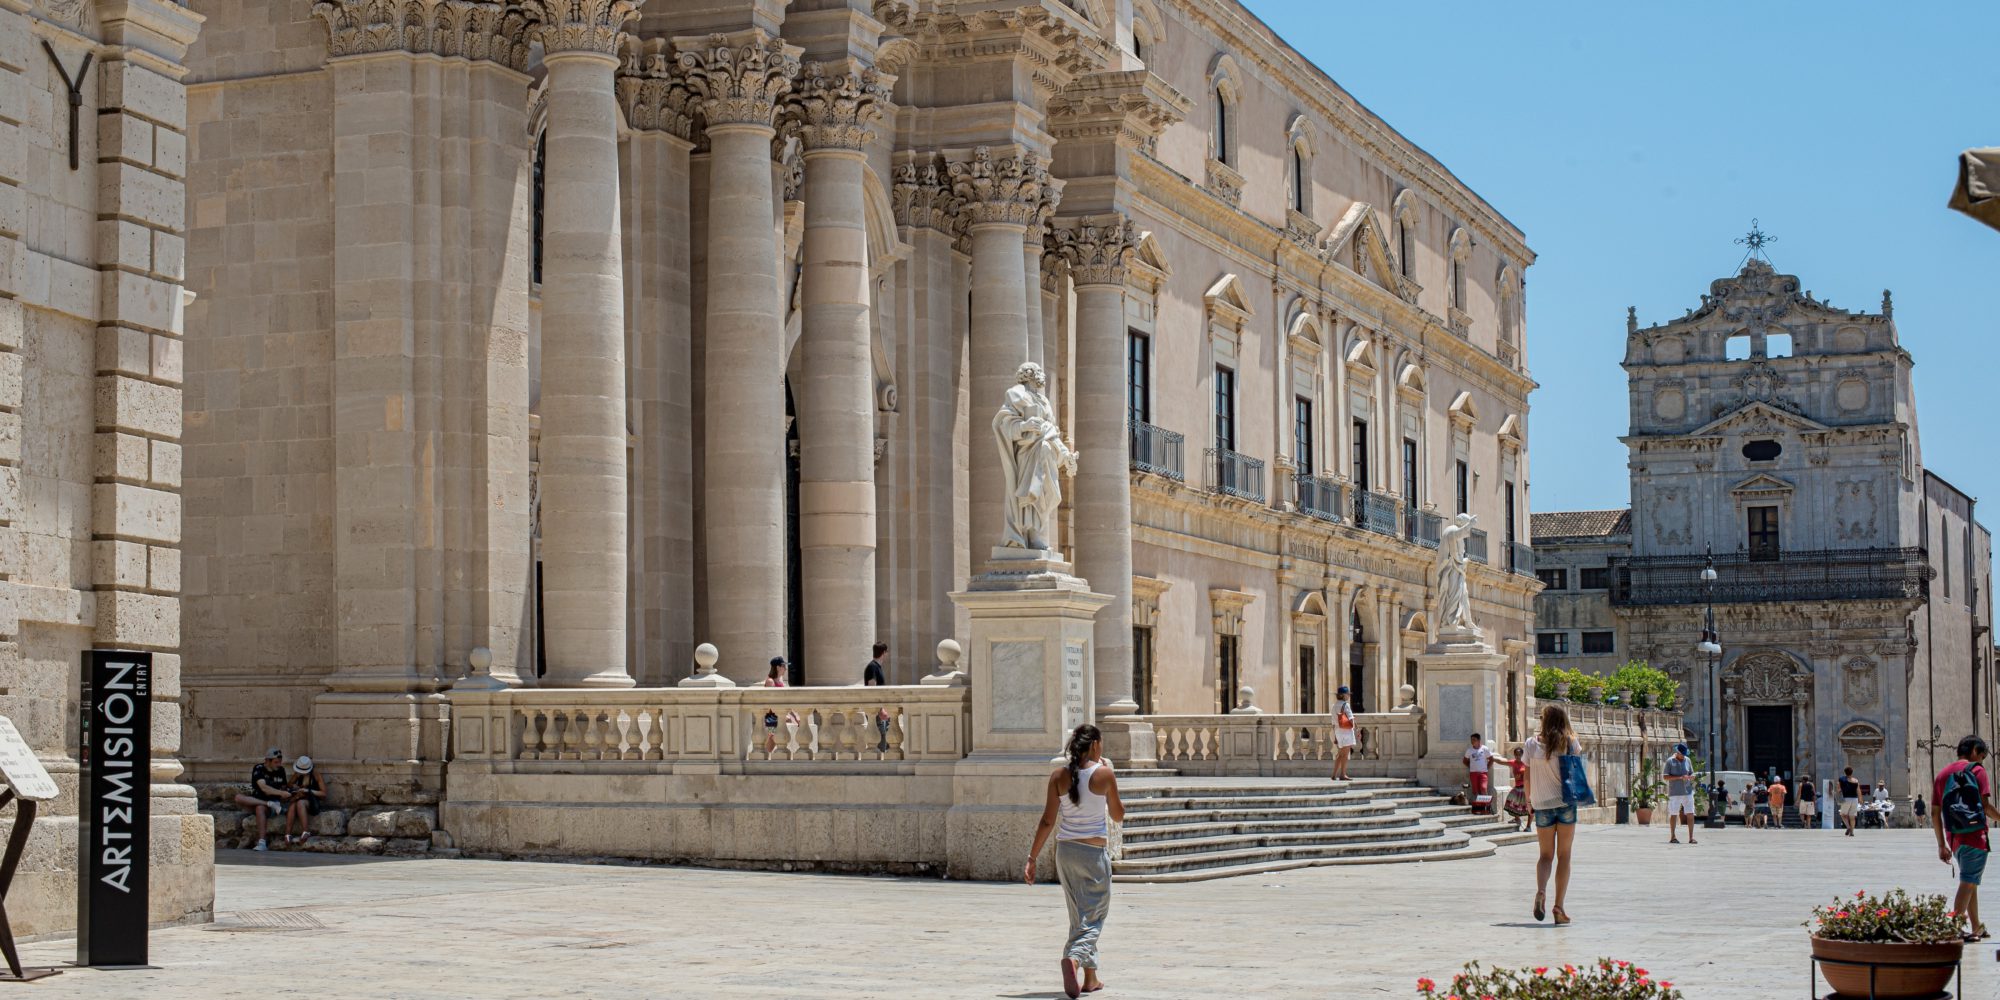 Siracusa is one of the many cities in the South-East part of Sicily that preserve a wonderful Boroque style.